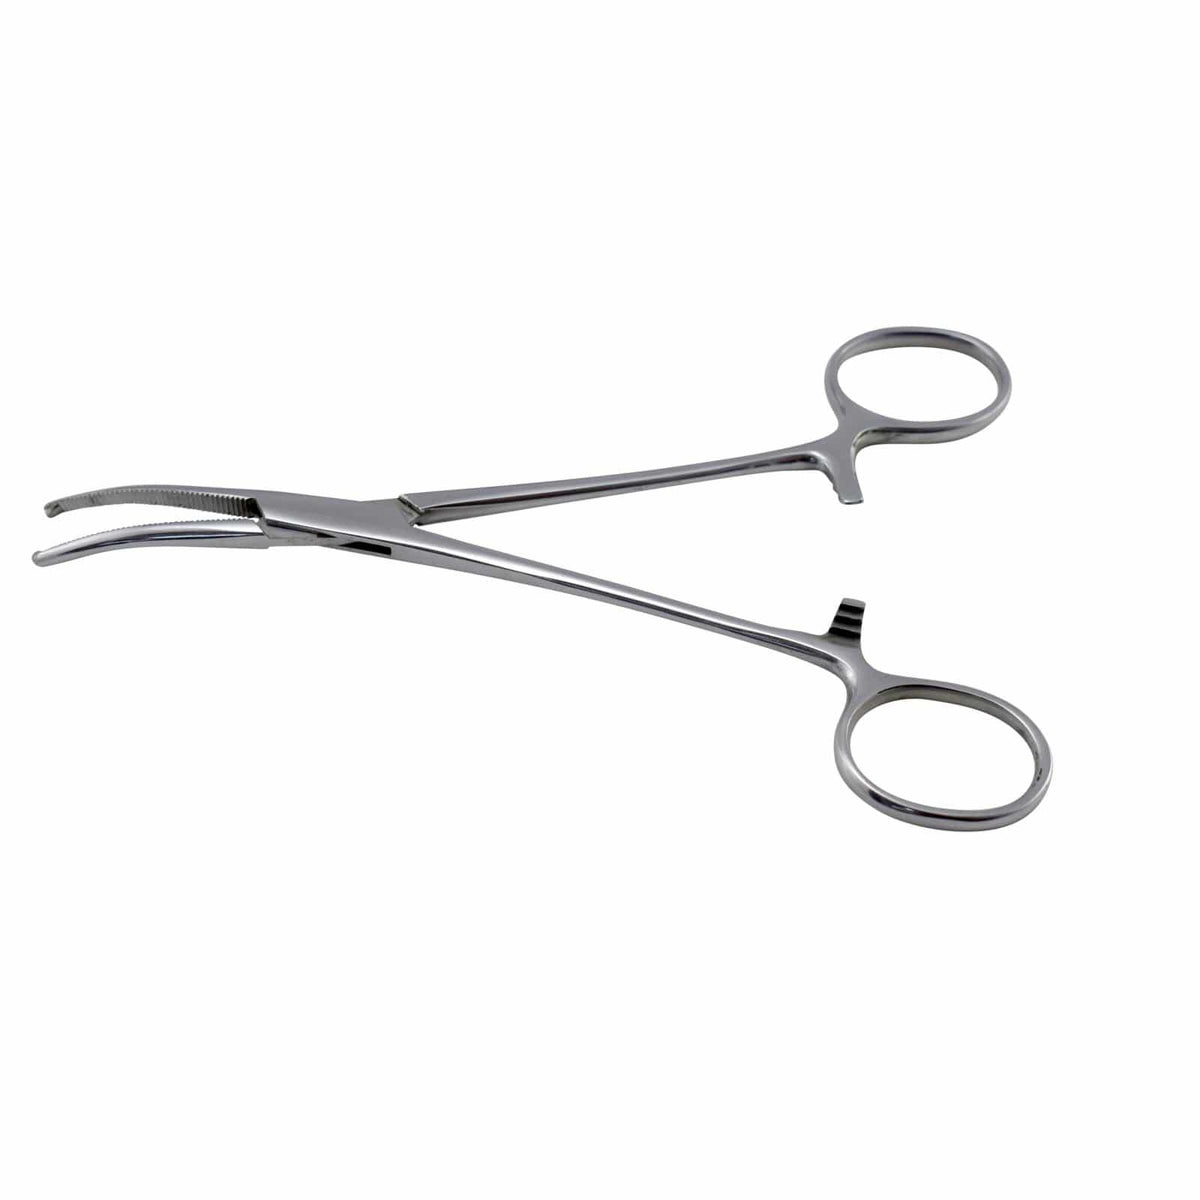 Armo Surgical Instruments 16cm / Curved Armo ROCHESTER-OCHSNER Artery Forcep